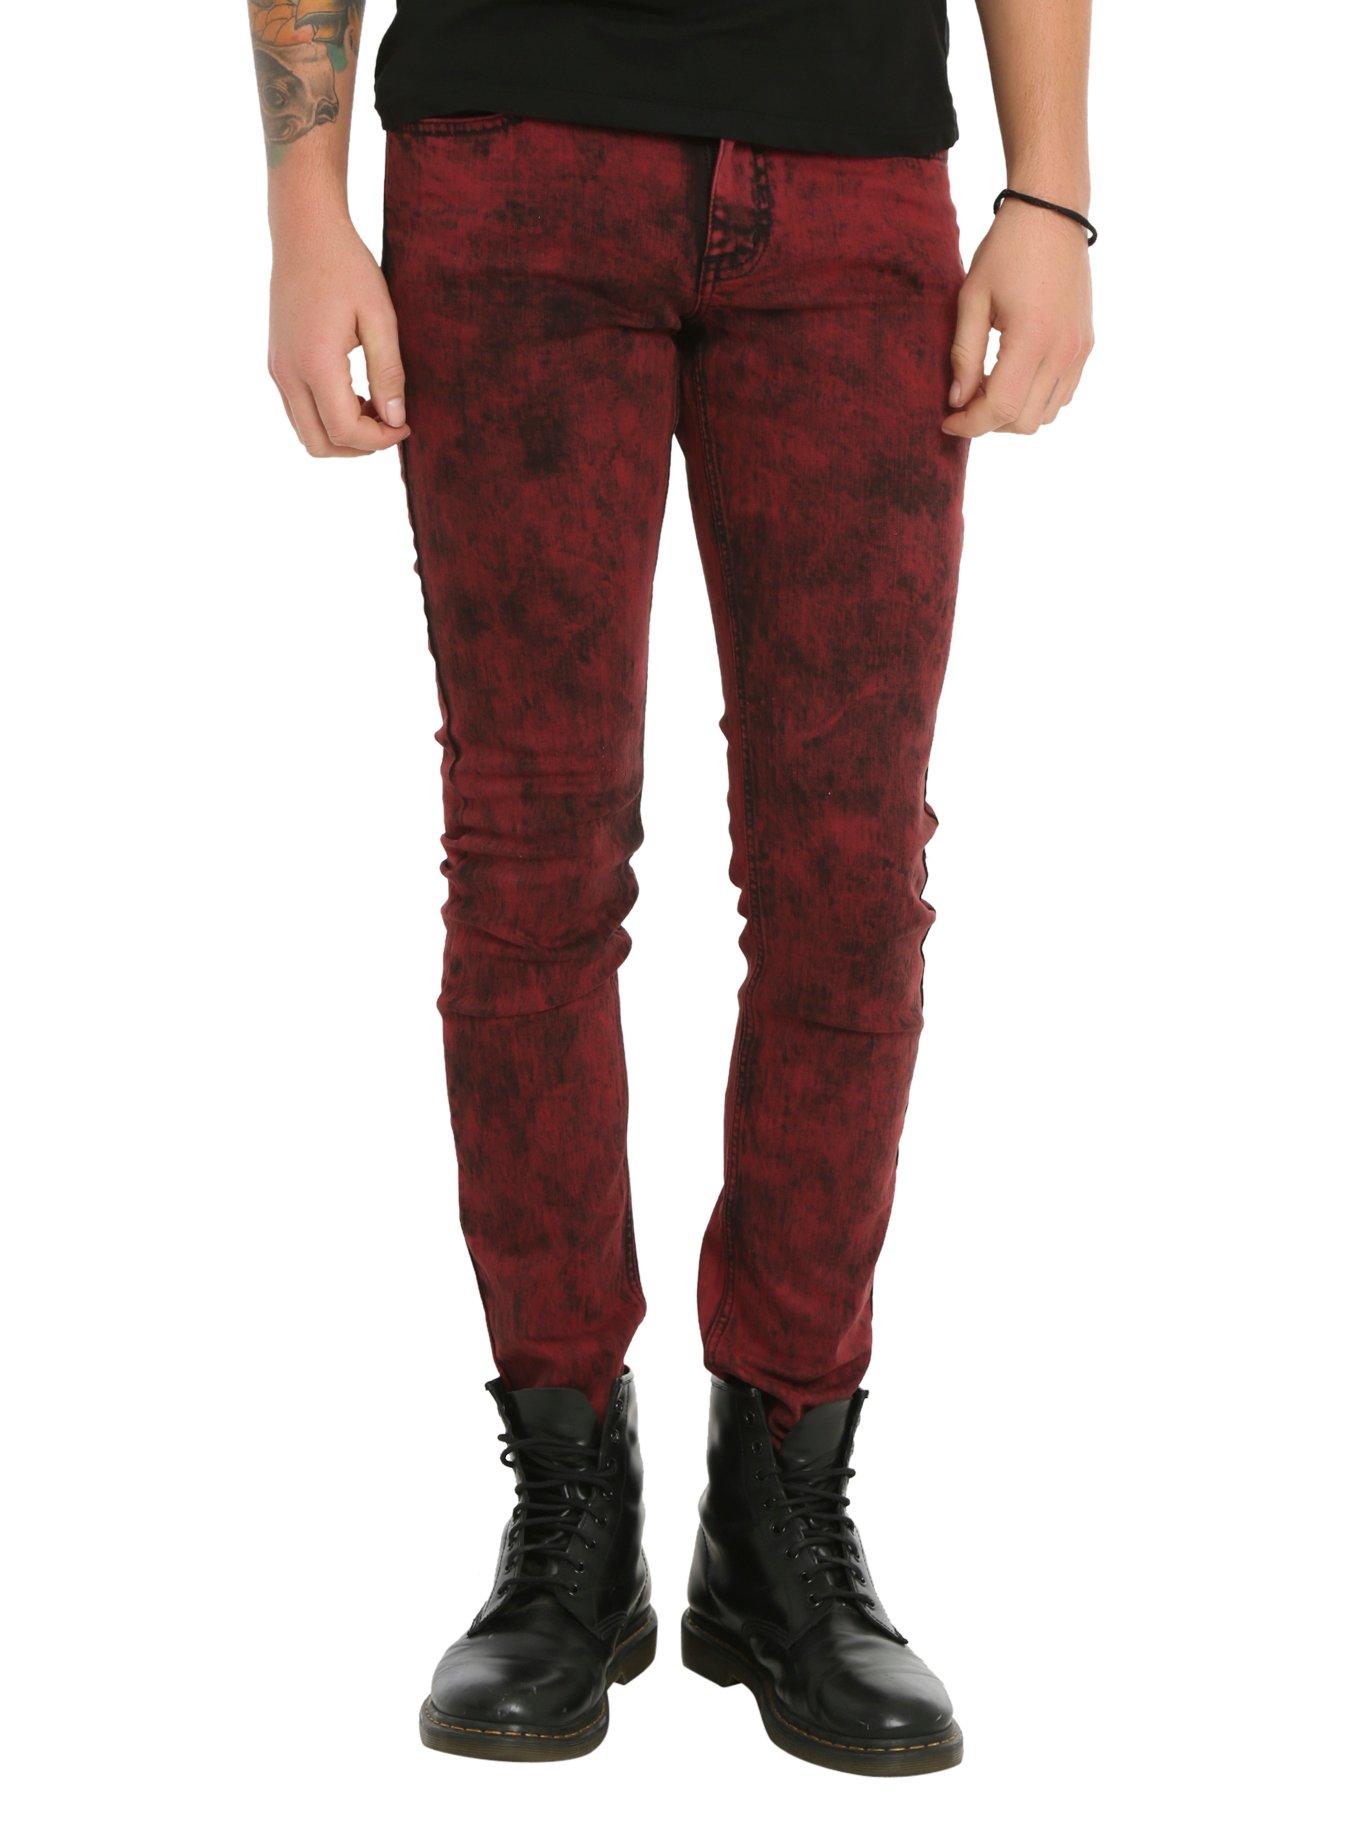 Acossi jeans ripped Red skinny washed jeans is stretchy and